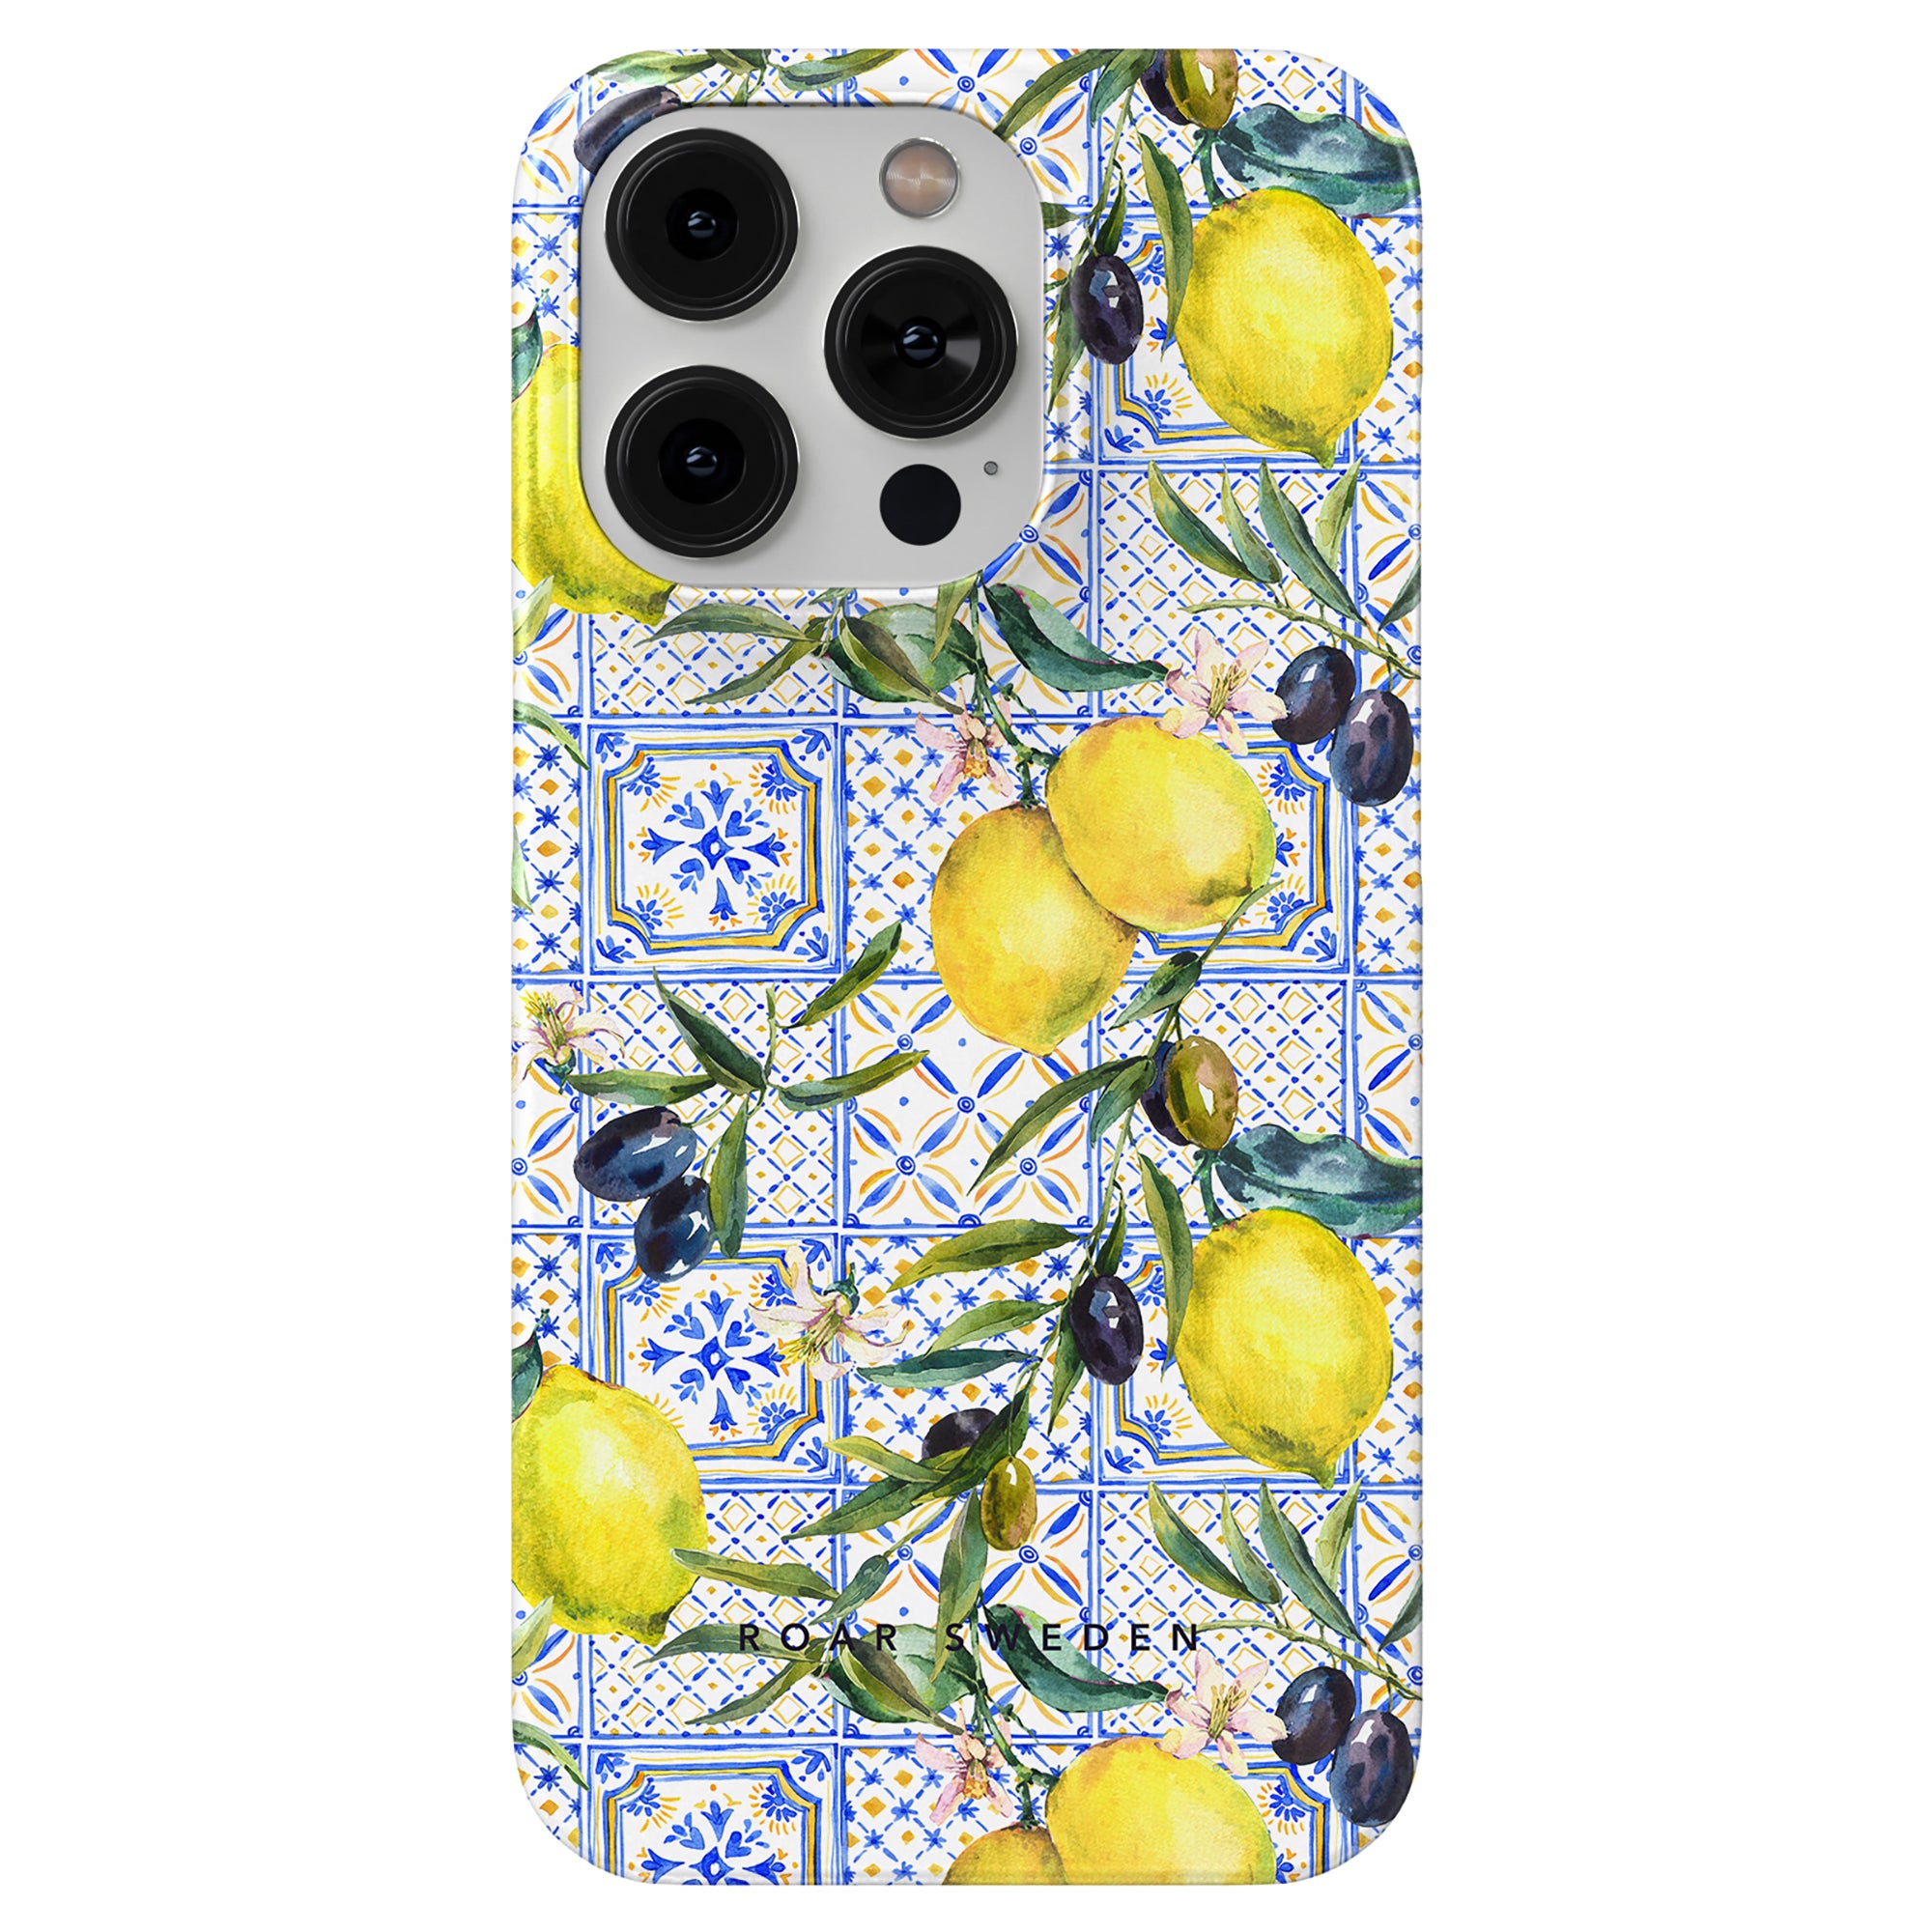 A Amalfi - Slim case with a rustic design featuring a Mediterranean tile motif and lemon illustrations.